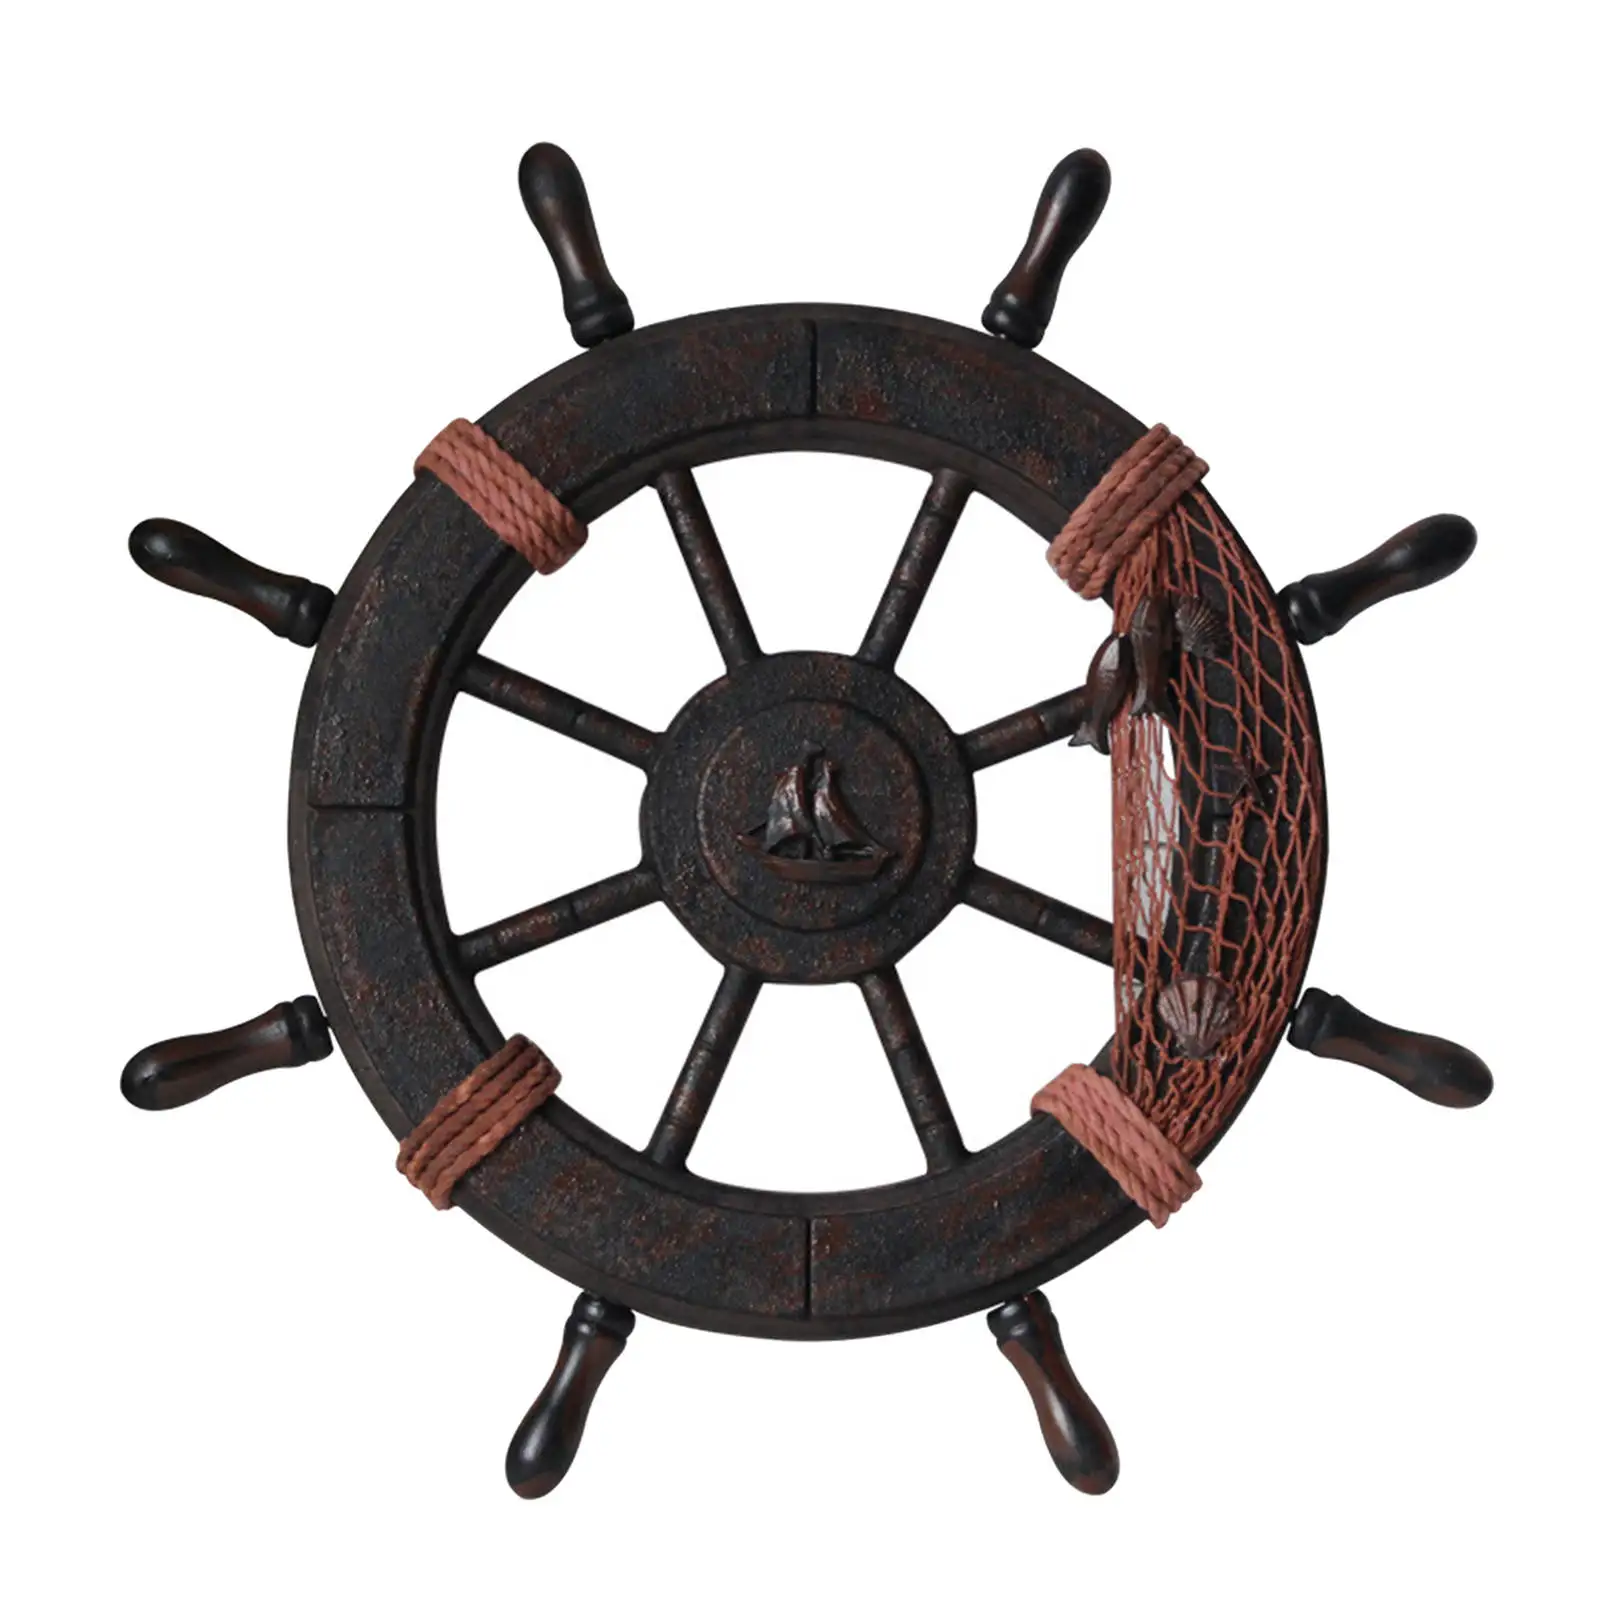 Vintage Ship Wheel Wood Wall Hanging Home Decor Pirate Steering